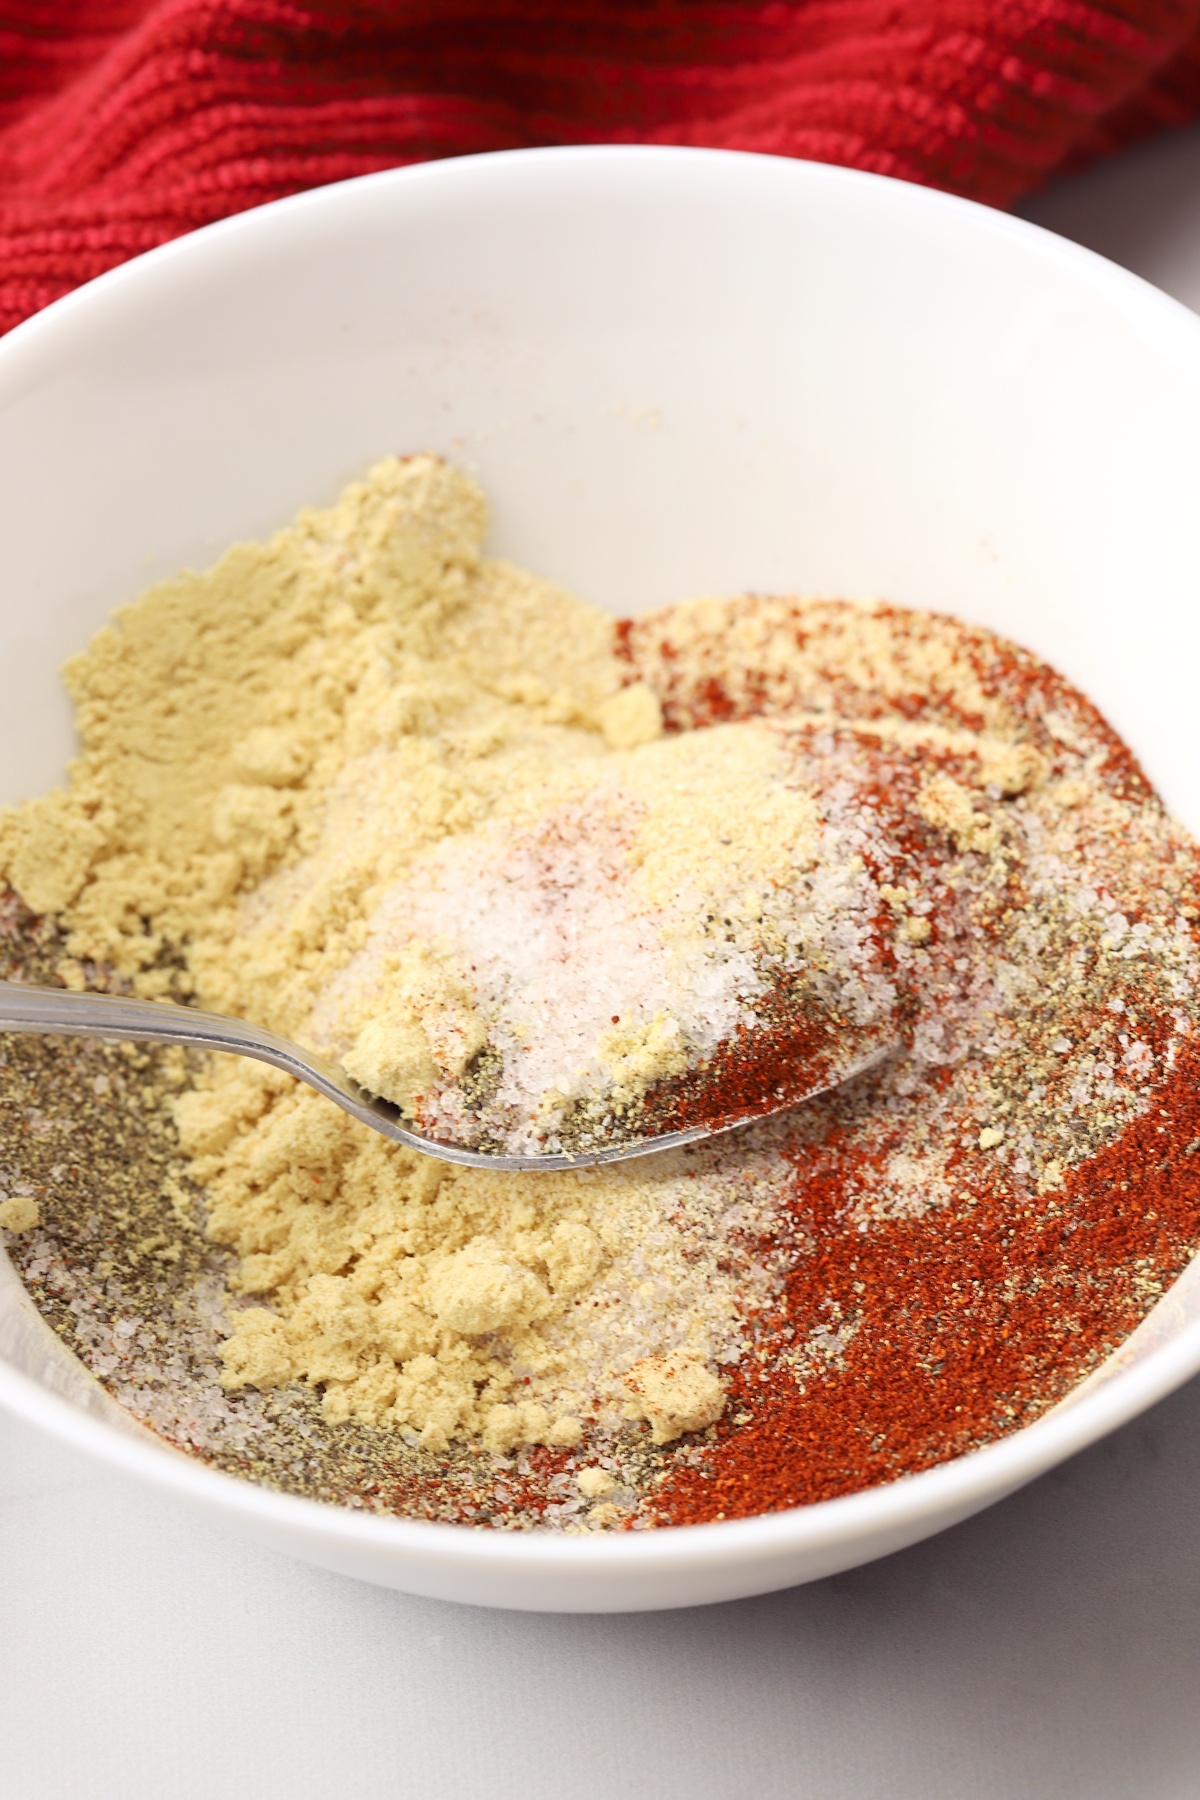 Mixing spices with a metal spoon.